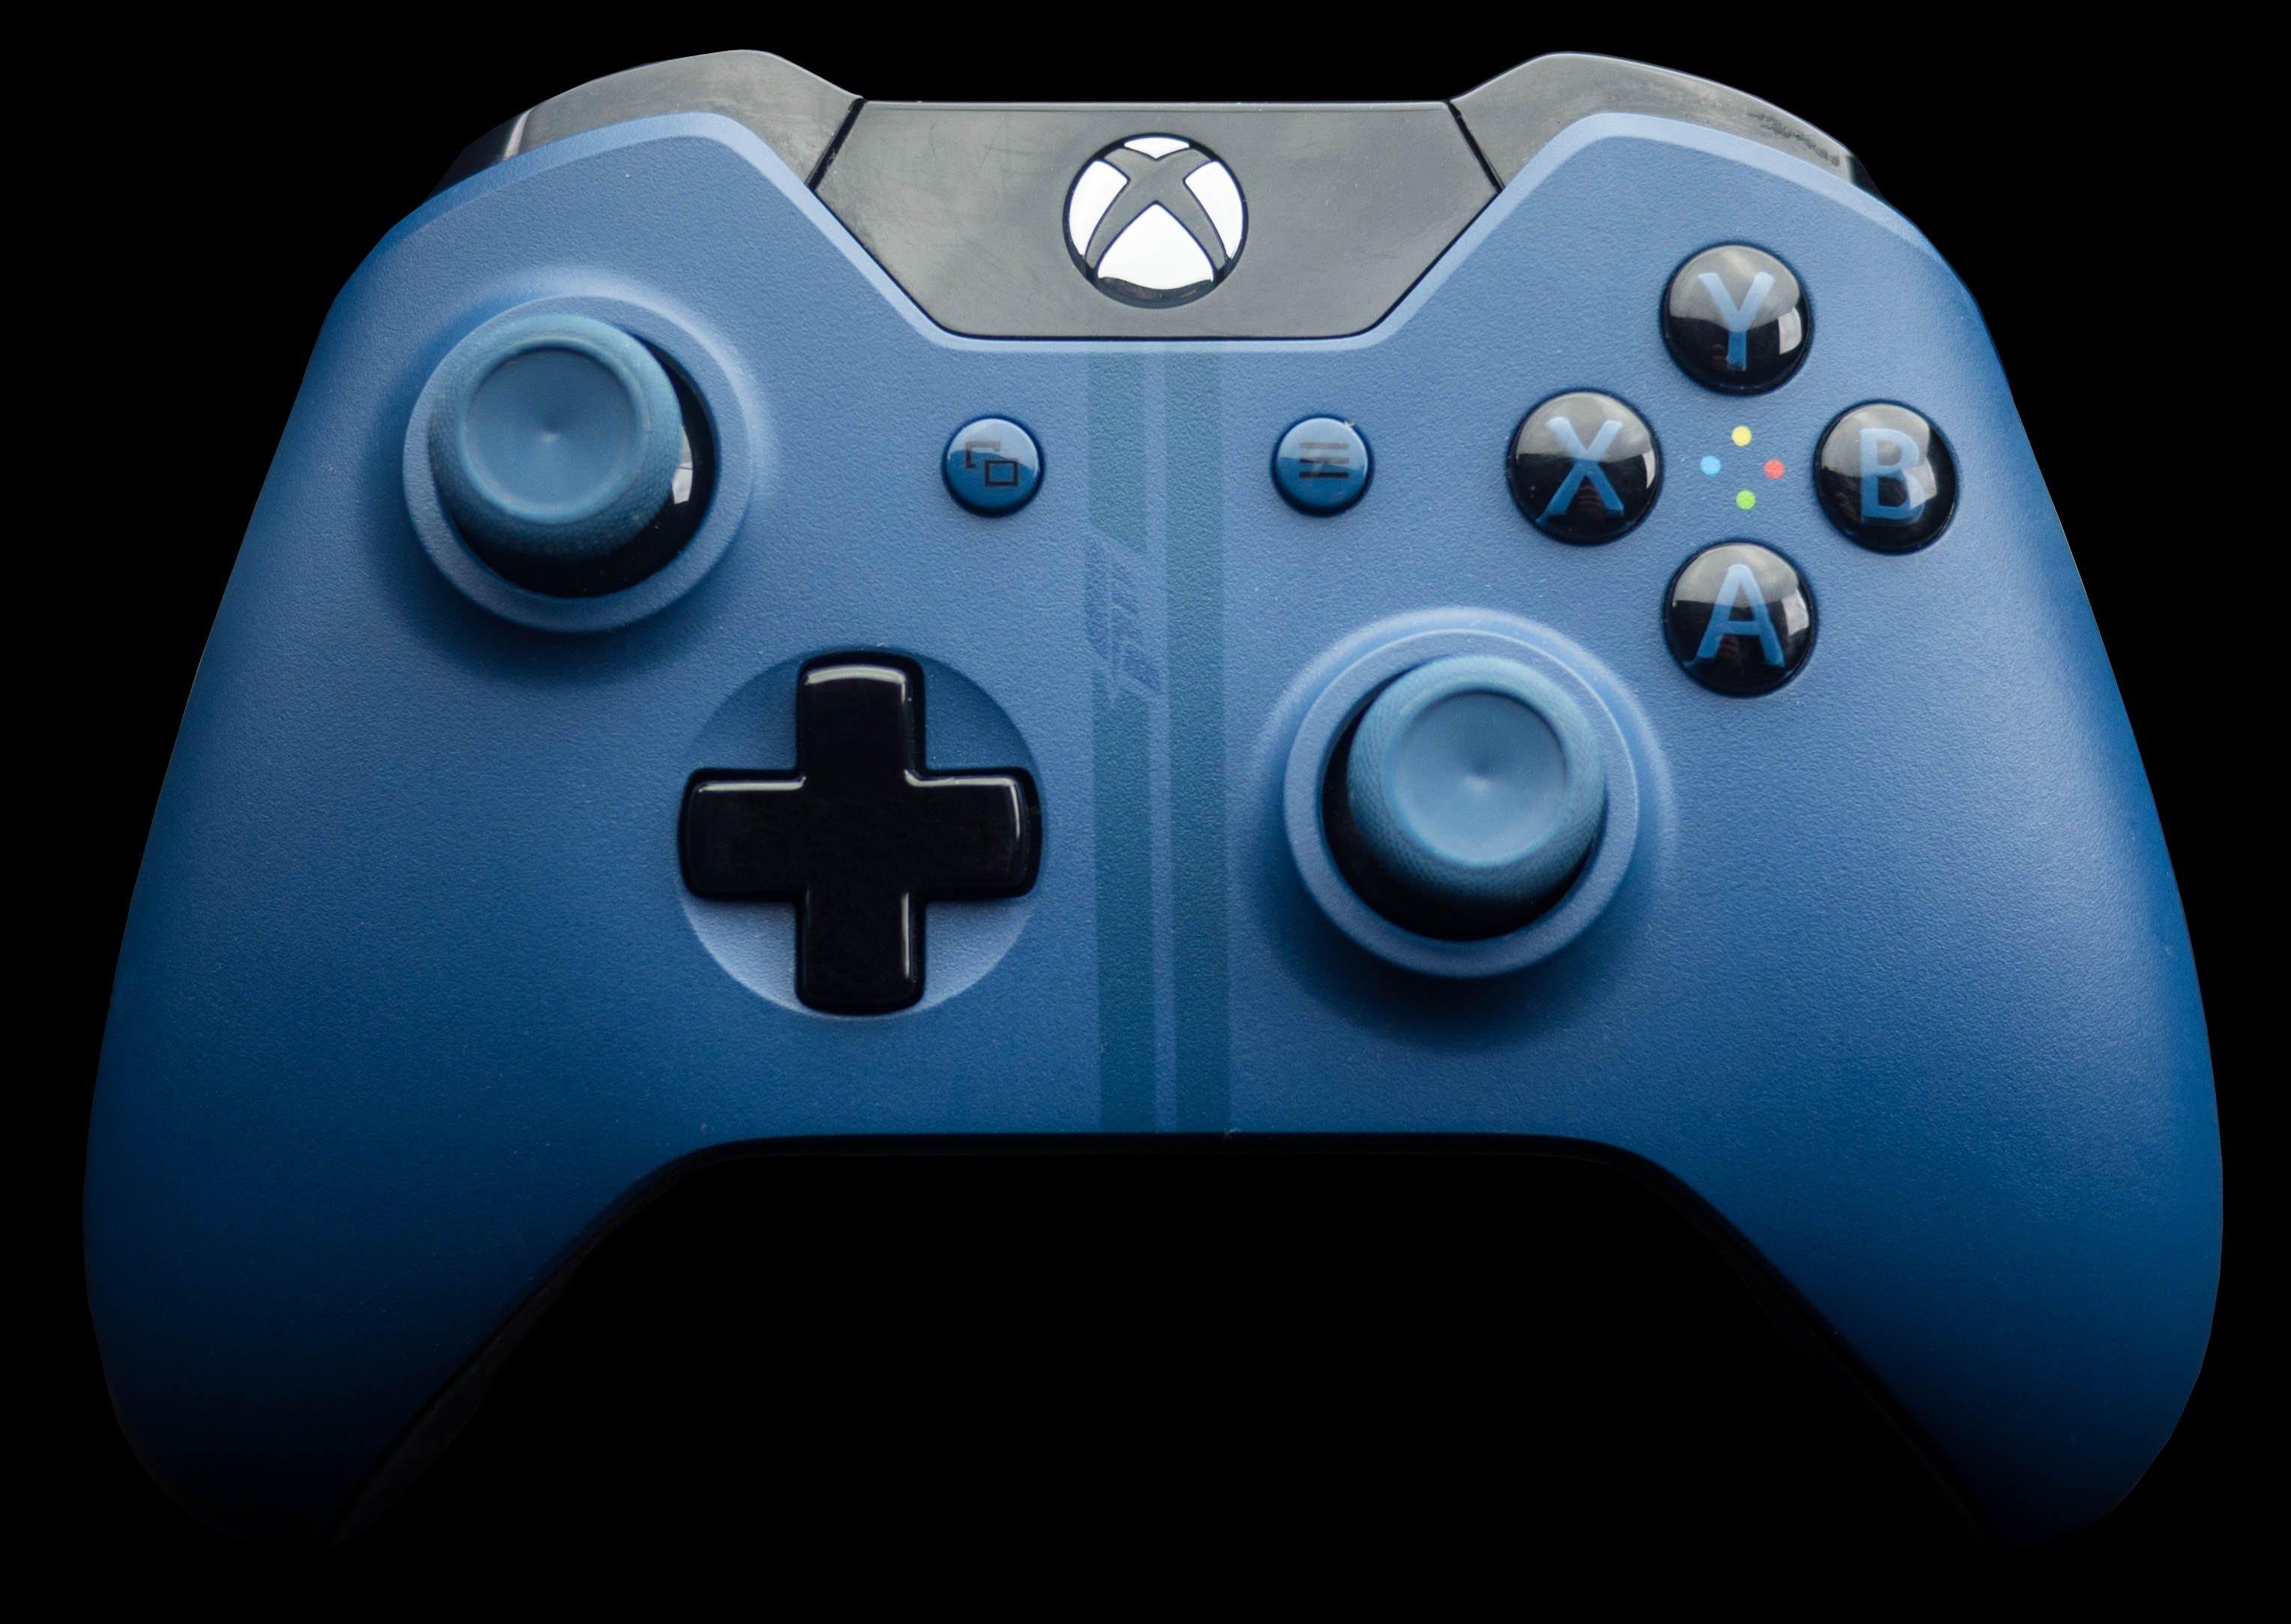 used xbox one controller at gamestop